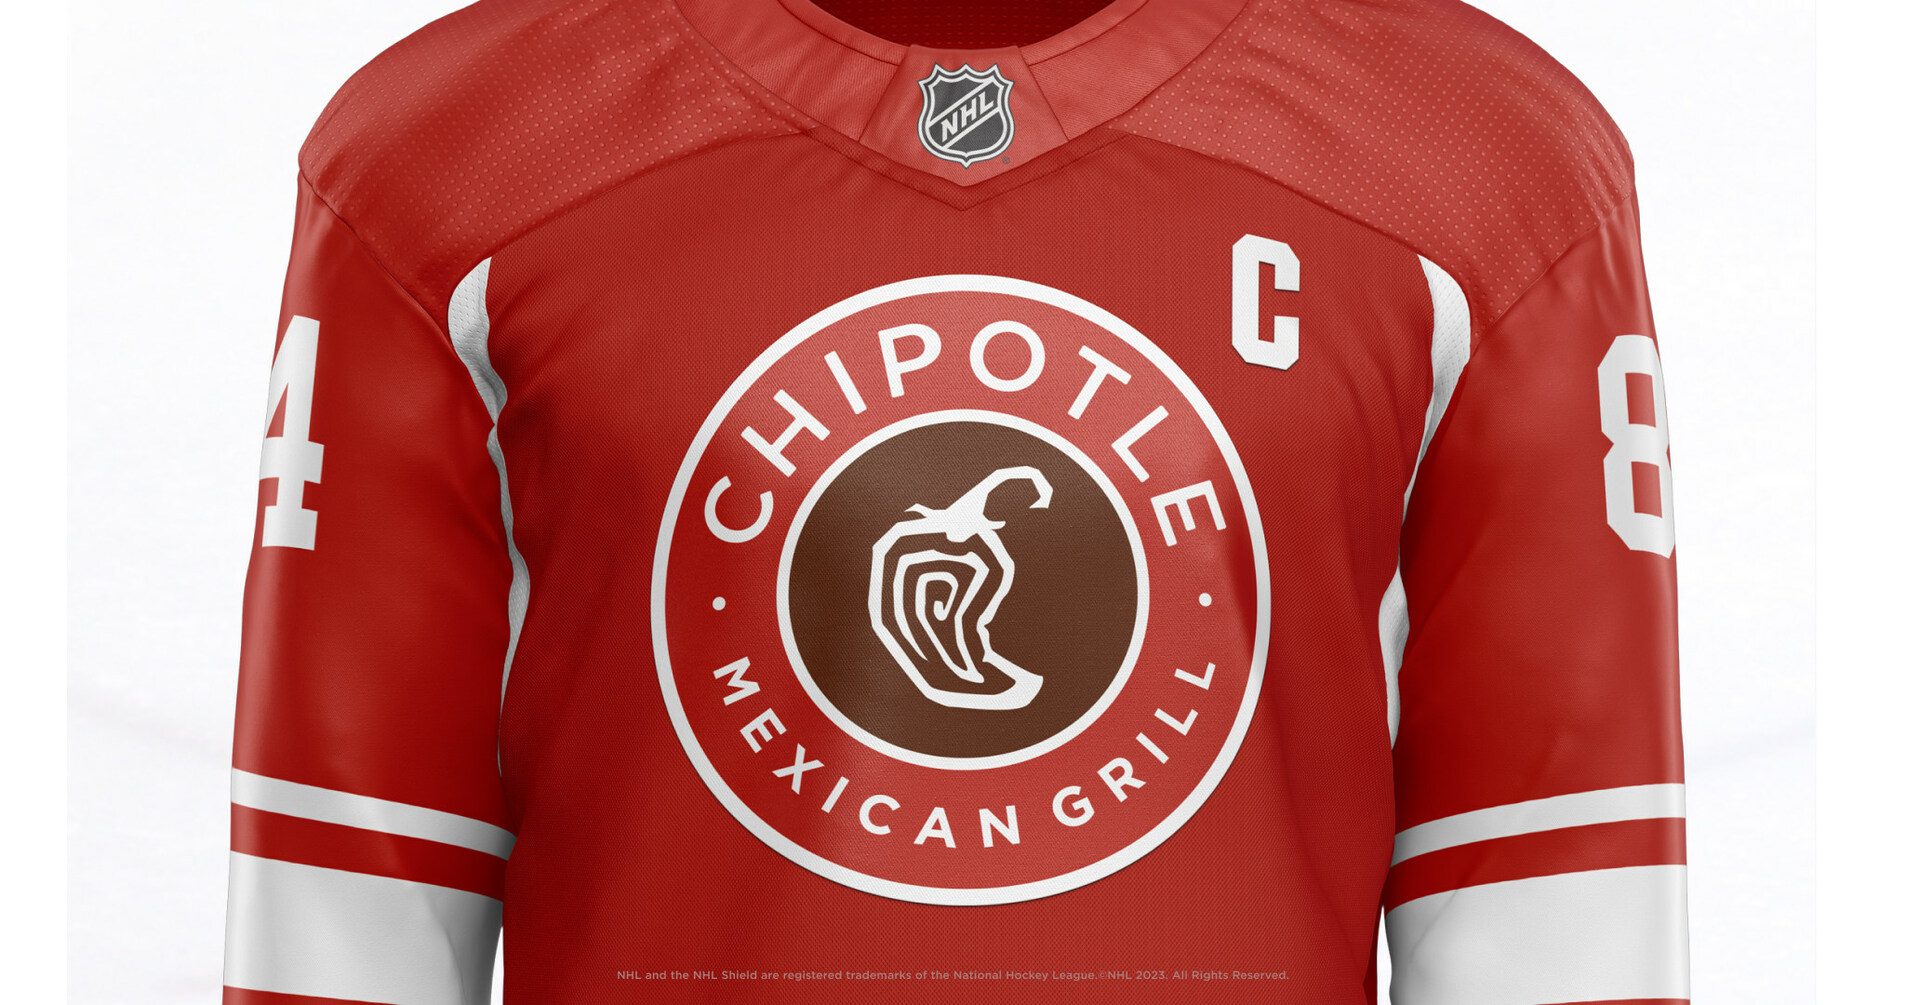 CHIPOTLE CELEBRATES THE 2023 STANLEY CUP® PLAYOFFS WITH HOCKEY JERSEY BOGO  OFFER IN THE U.S. AND CANADA